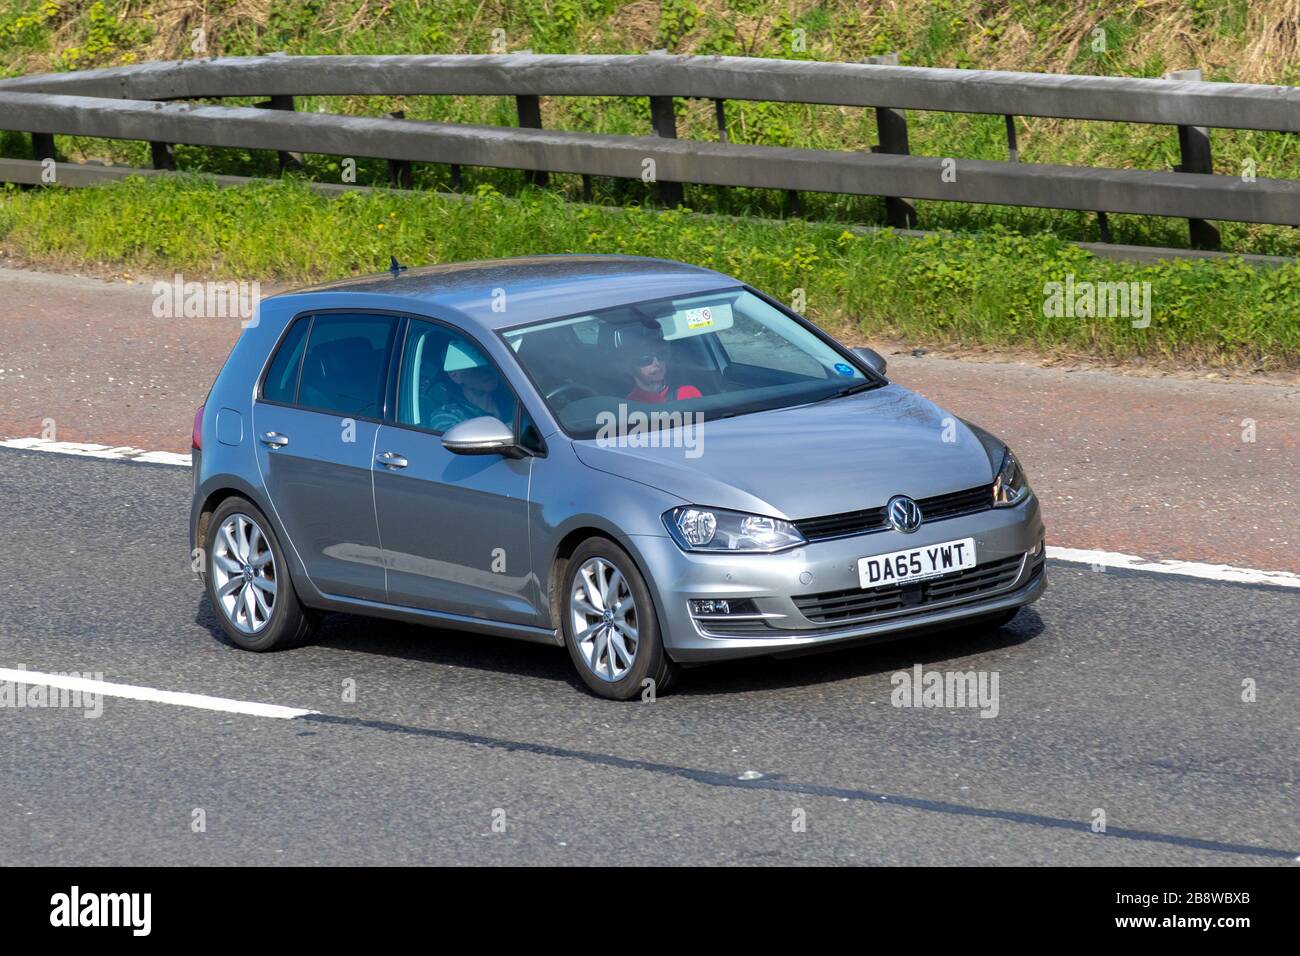 2015 silver Volkswagen Golf GT TSI ACT BMT; UK vehicular traffic, transport, moving vehicles, vehicle, roads, motors, motoring  on the M6 motorway highway Stock Photo